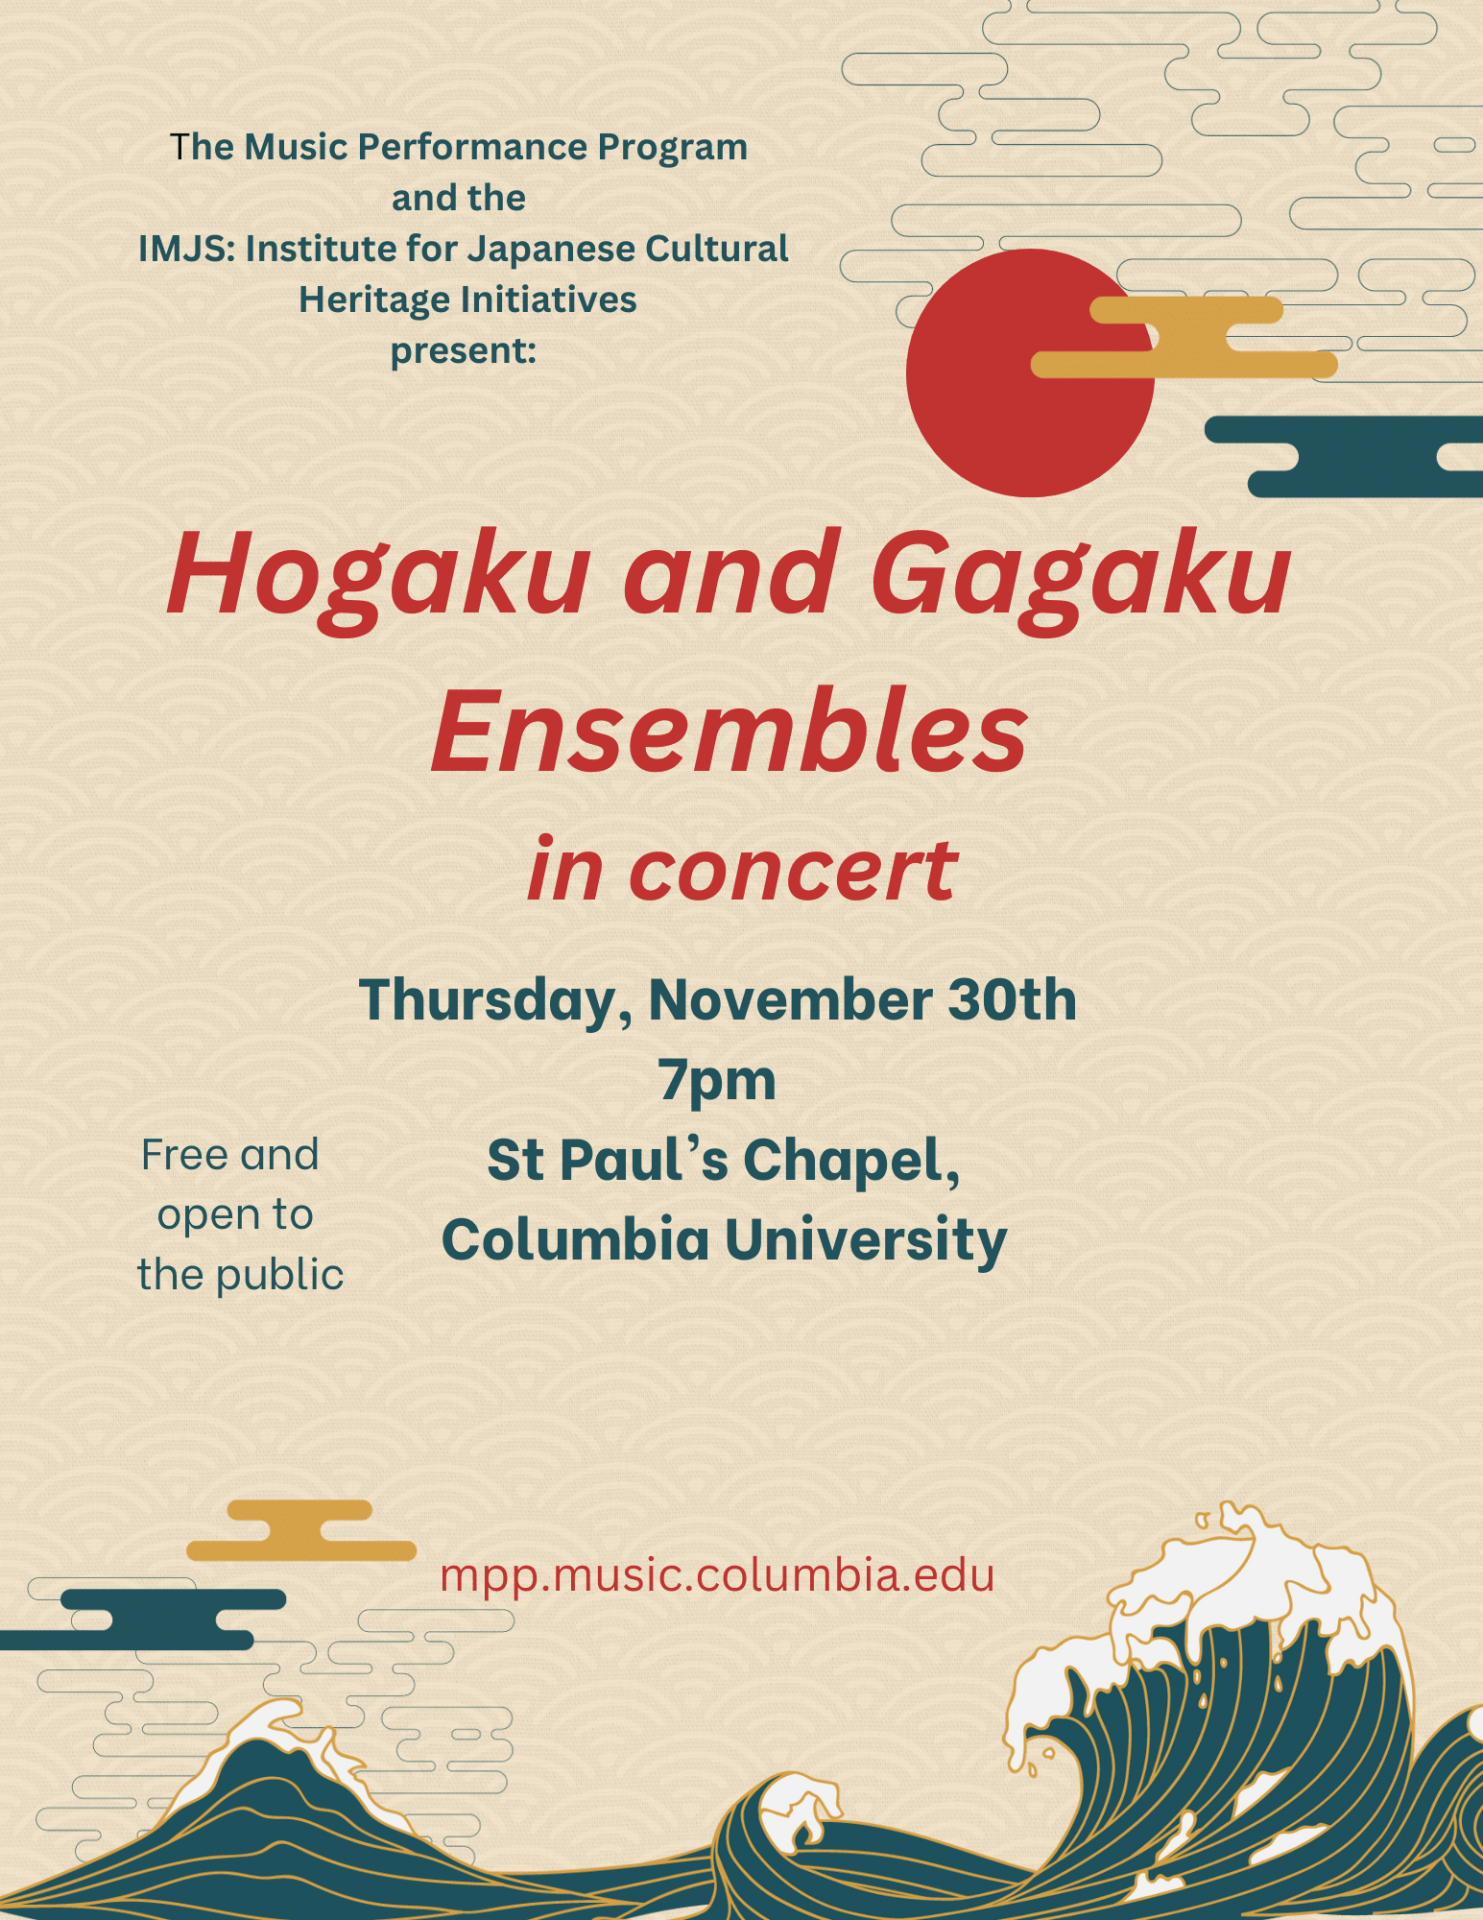 Flyer that says "Hogaku and Gagaku Ensembles in concert" on Thursday, November 30th @ 7pm at St. Paul's Chapel, Columbia University. Graphic of a sun and clouds, with ocean waves lining the bottom.